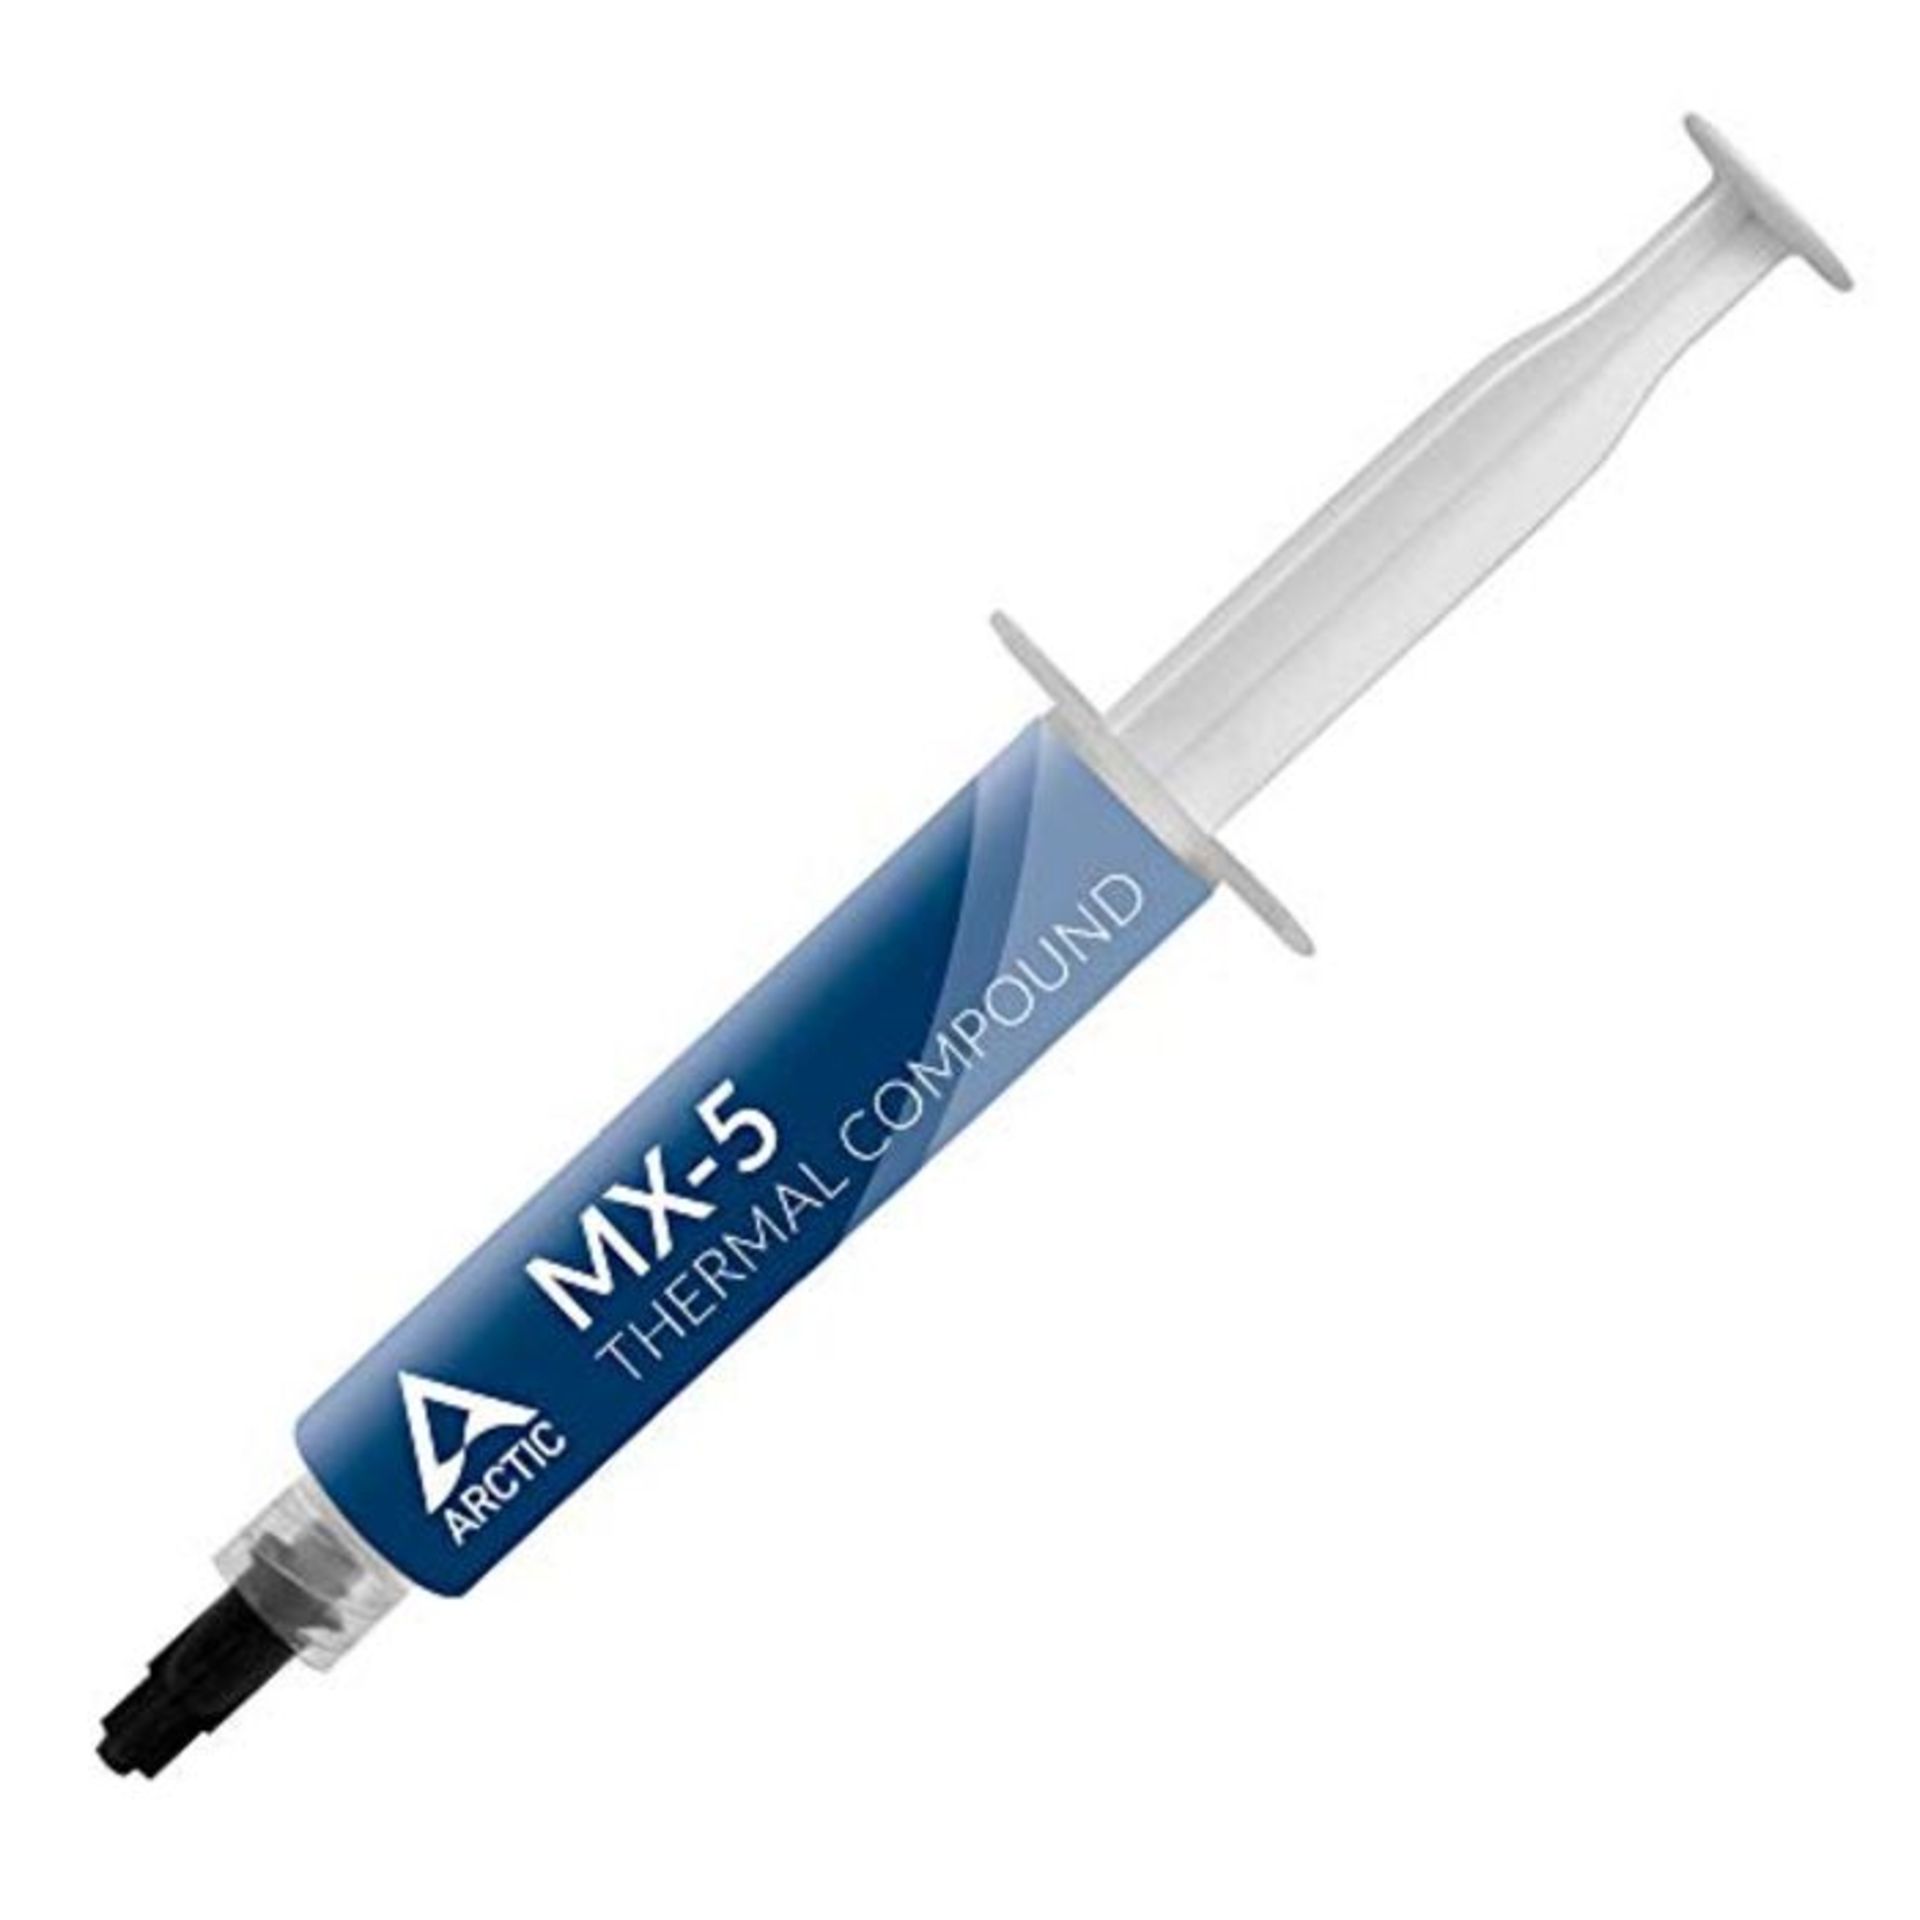 ARCTIC MX-5 (50 g) - Ultimate Performance Thermal Paste for all processors (CPU, GPU -